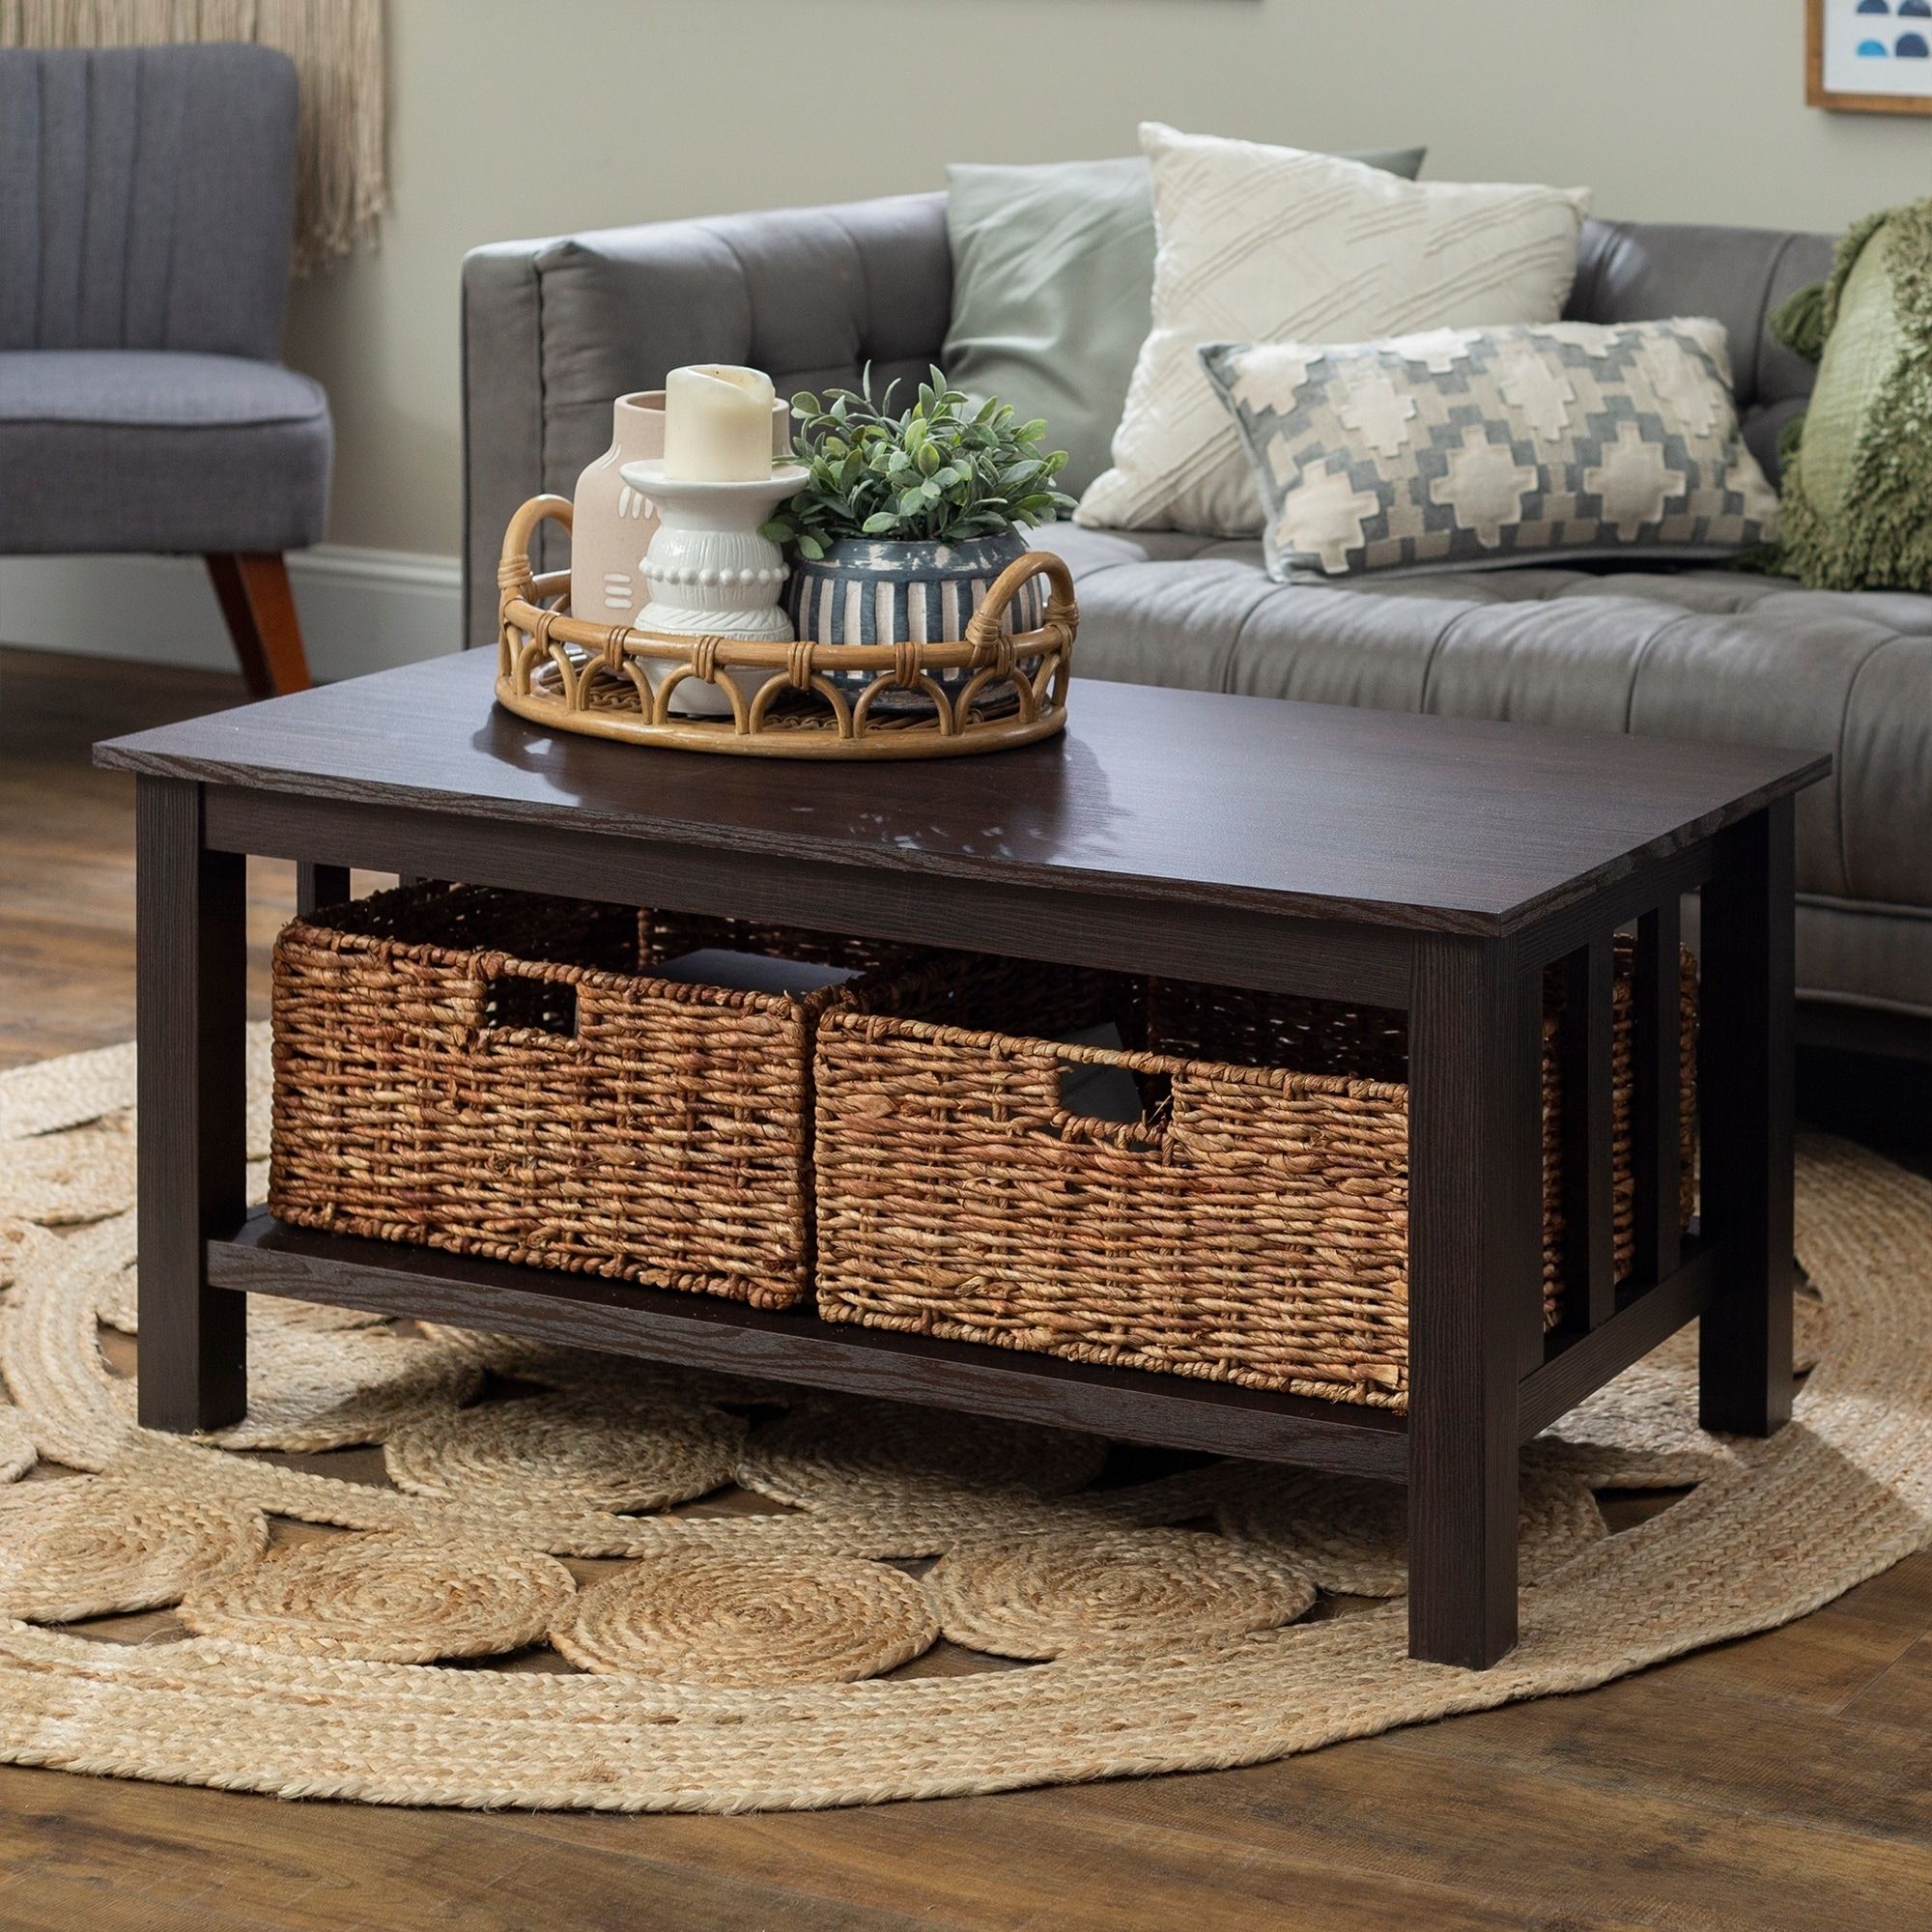 Coffee Tables With Storage – Hoolitriple In Coffee Tables With Open Storage Shelves (Gallery 10 of 20)